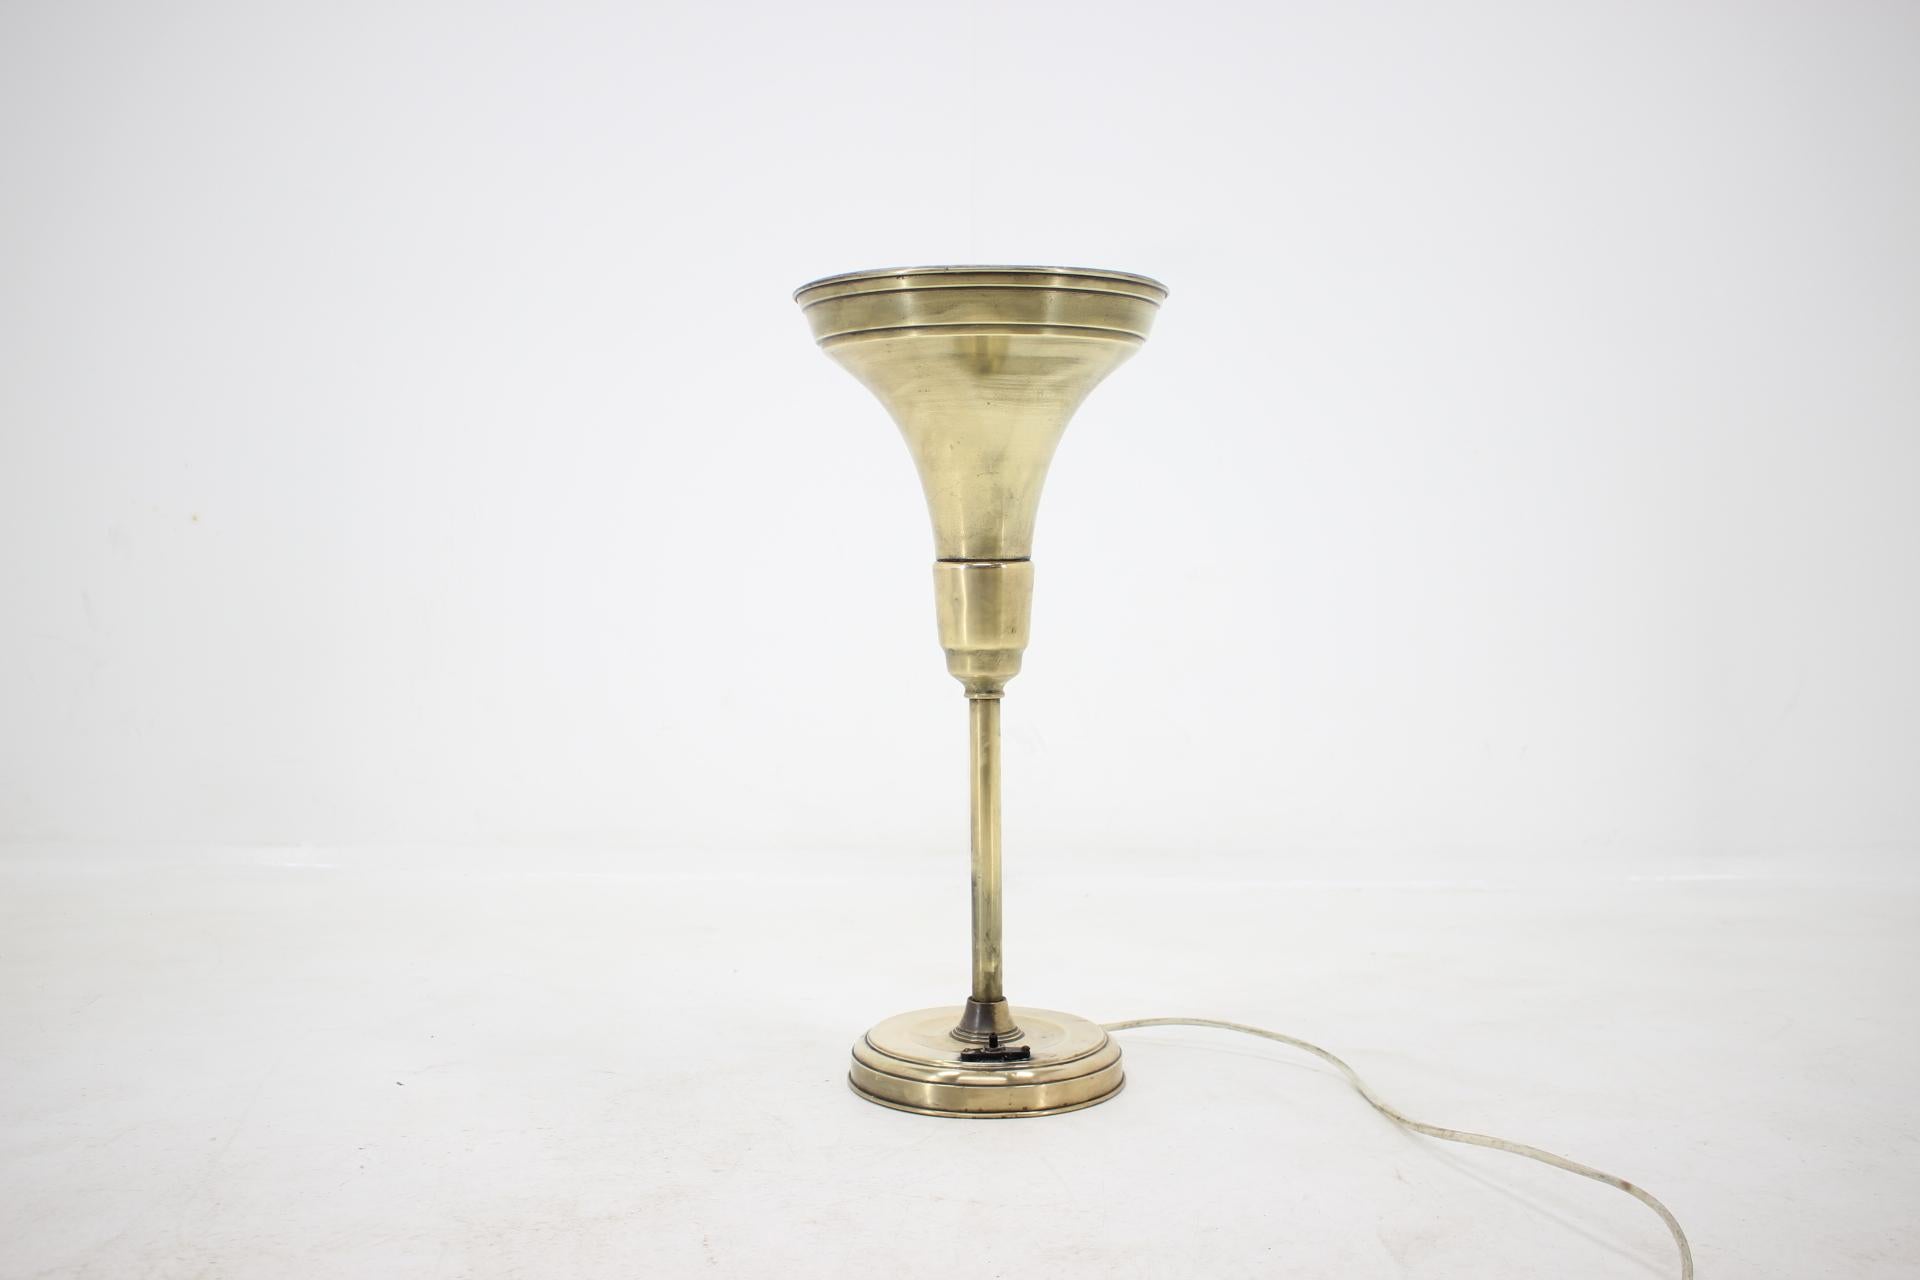 - Bauhaus, Art Deco, Functionalism
- Floor or table
- Very rare model
- Marked by label
This is an early 1900s collector's lamp made by Albert L. Arenberg, an Electrical Engineer and inventor, who created a Light Manufacturing company called